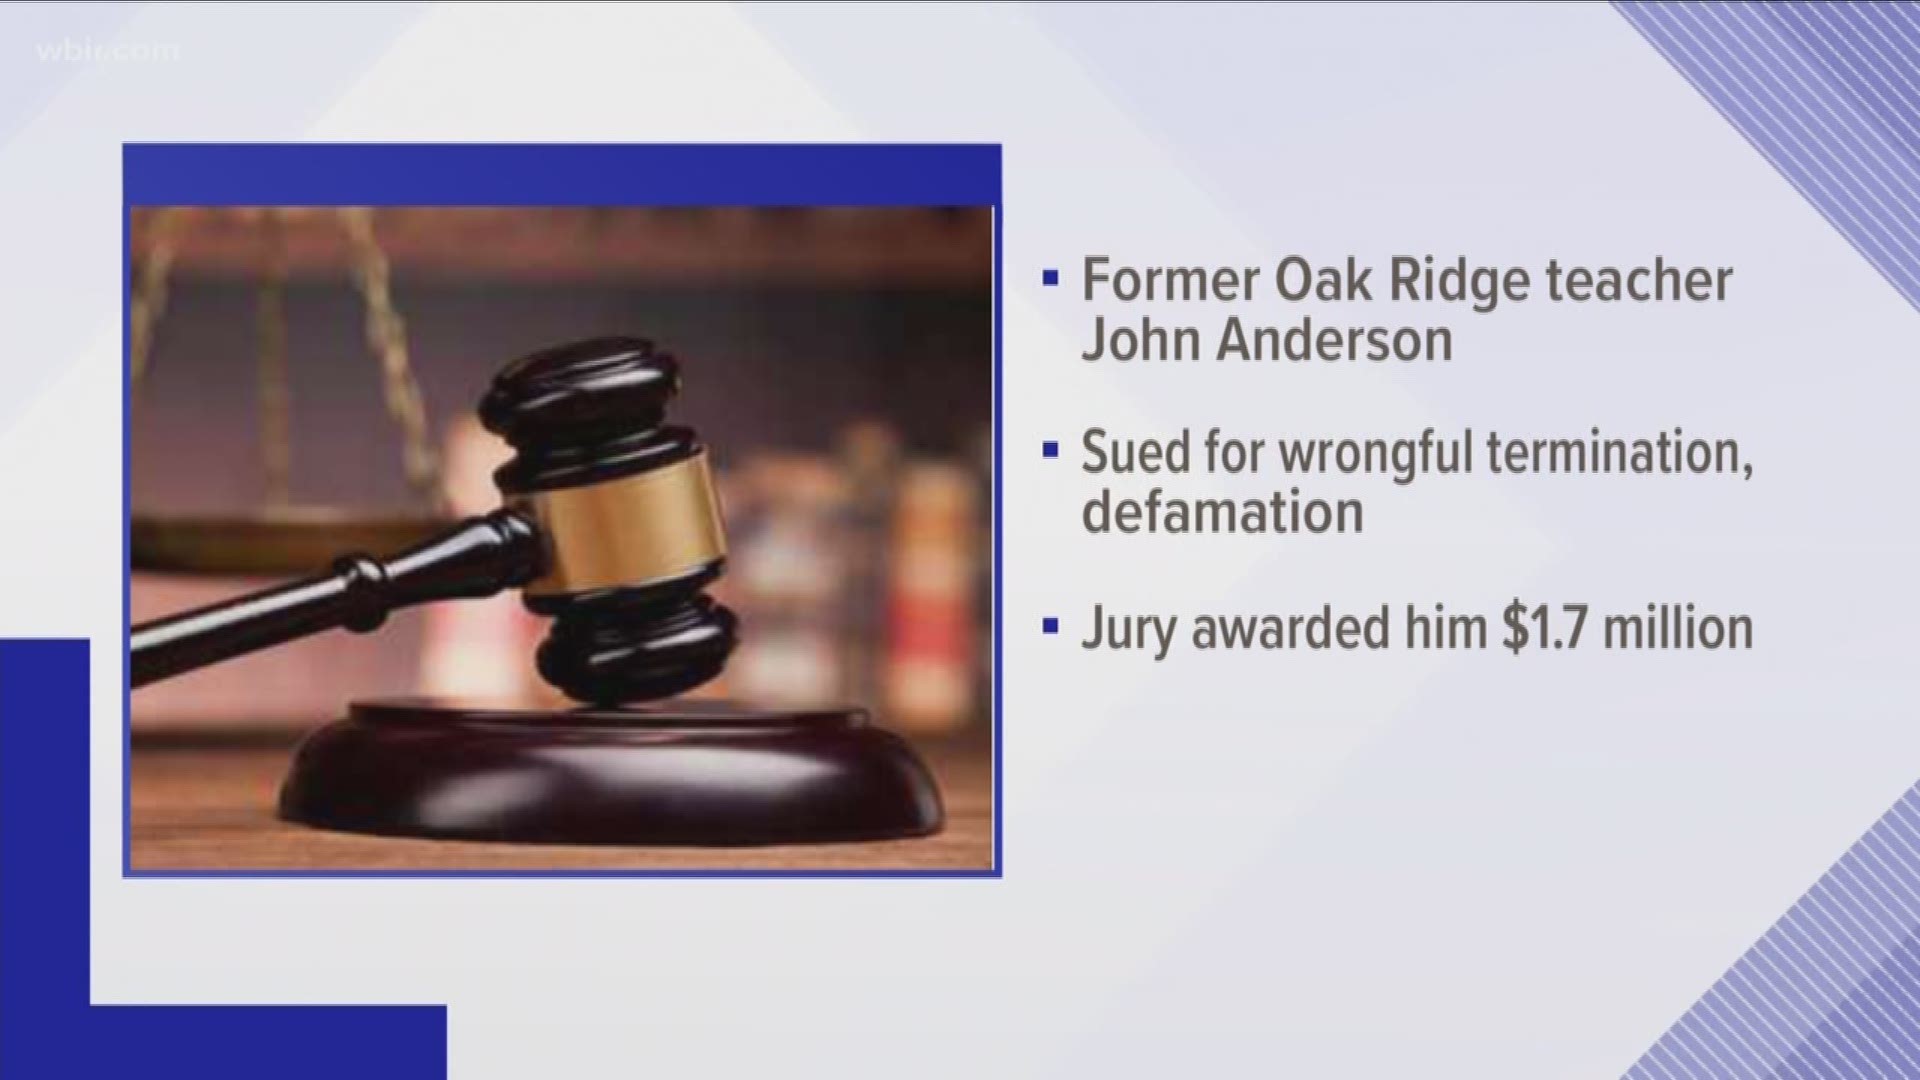 A former Oak Ridge teacher won more than $1.7 million after suing Oak Ridge city schools for wrongful termination, among other things.